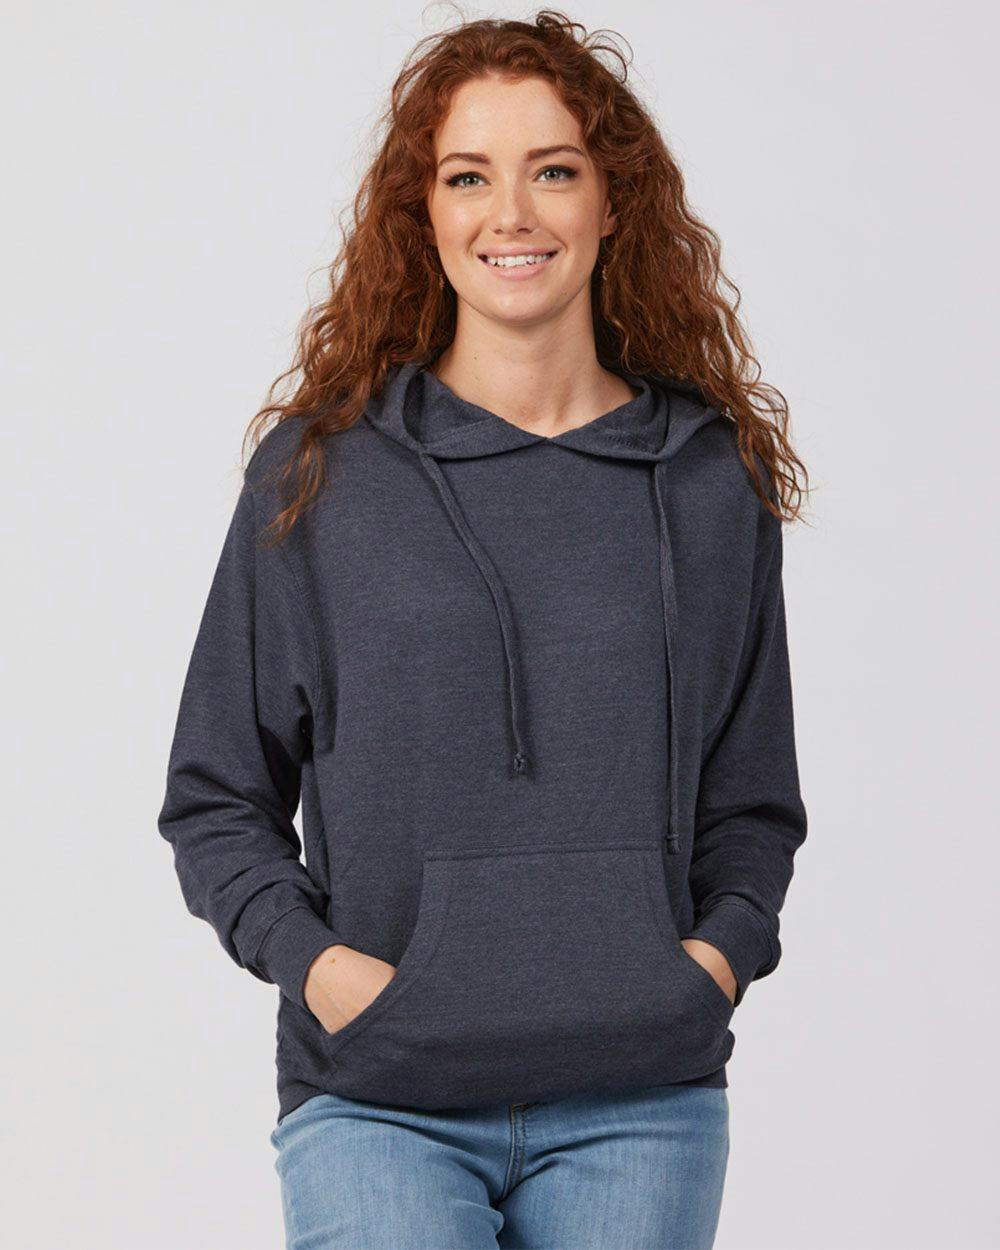 Image for Unisex Premium French Terry Hooded Sweatshirt - 583